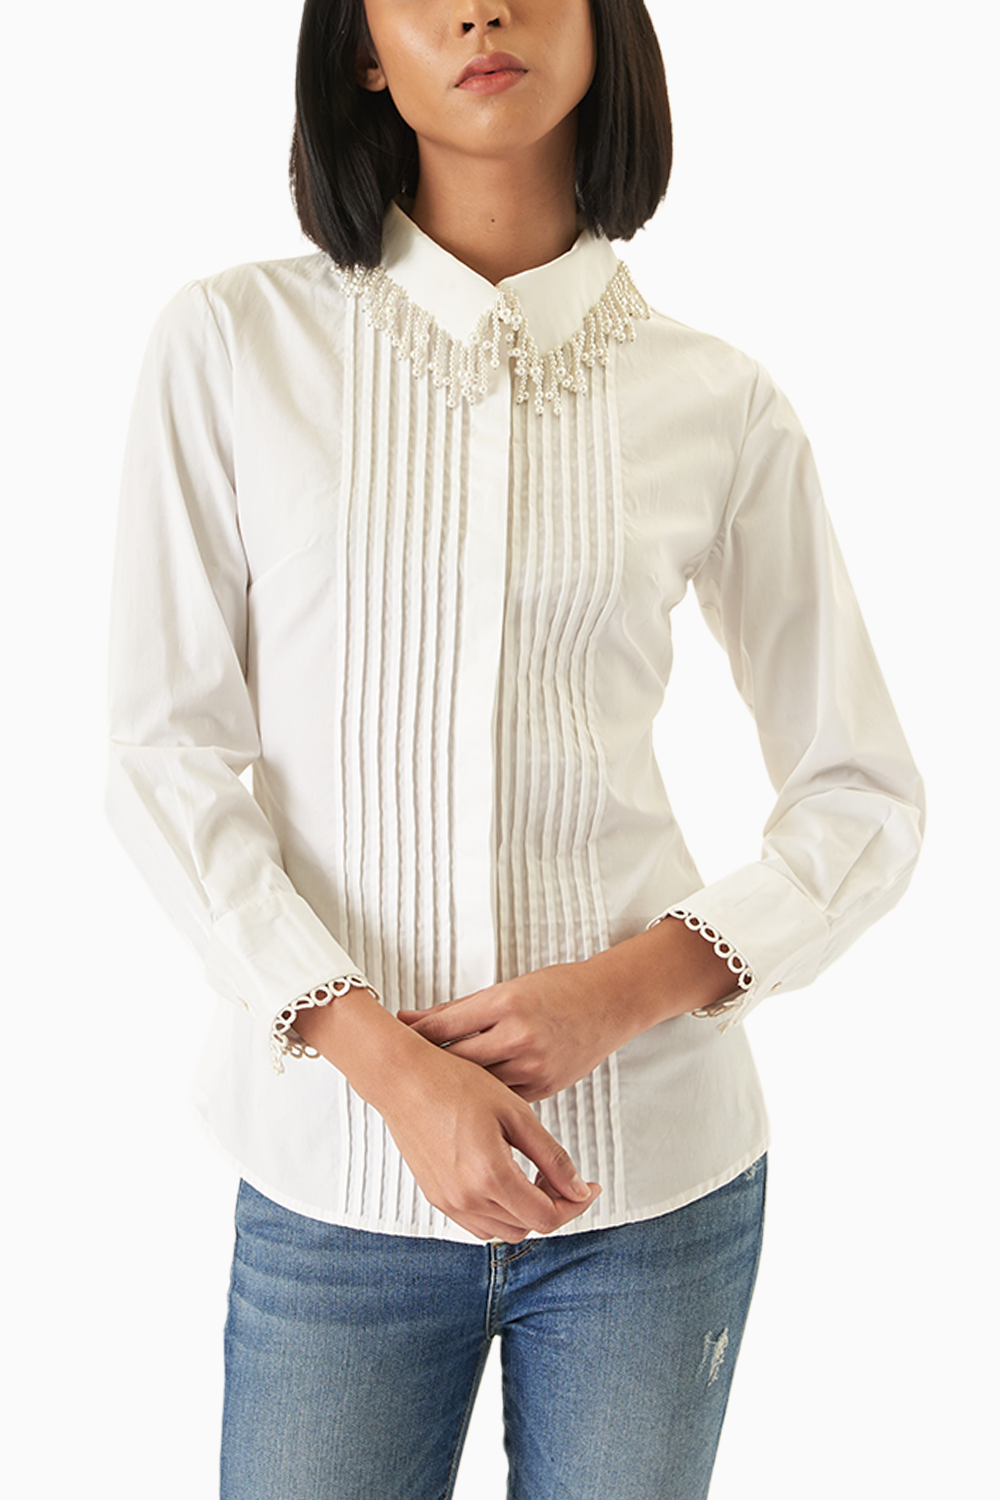 White Pintucked Shirt with Pearl Embellished Collar